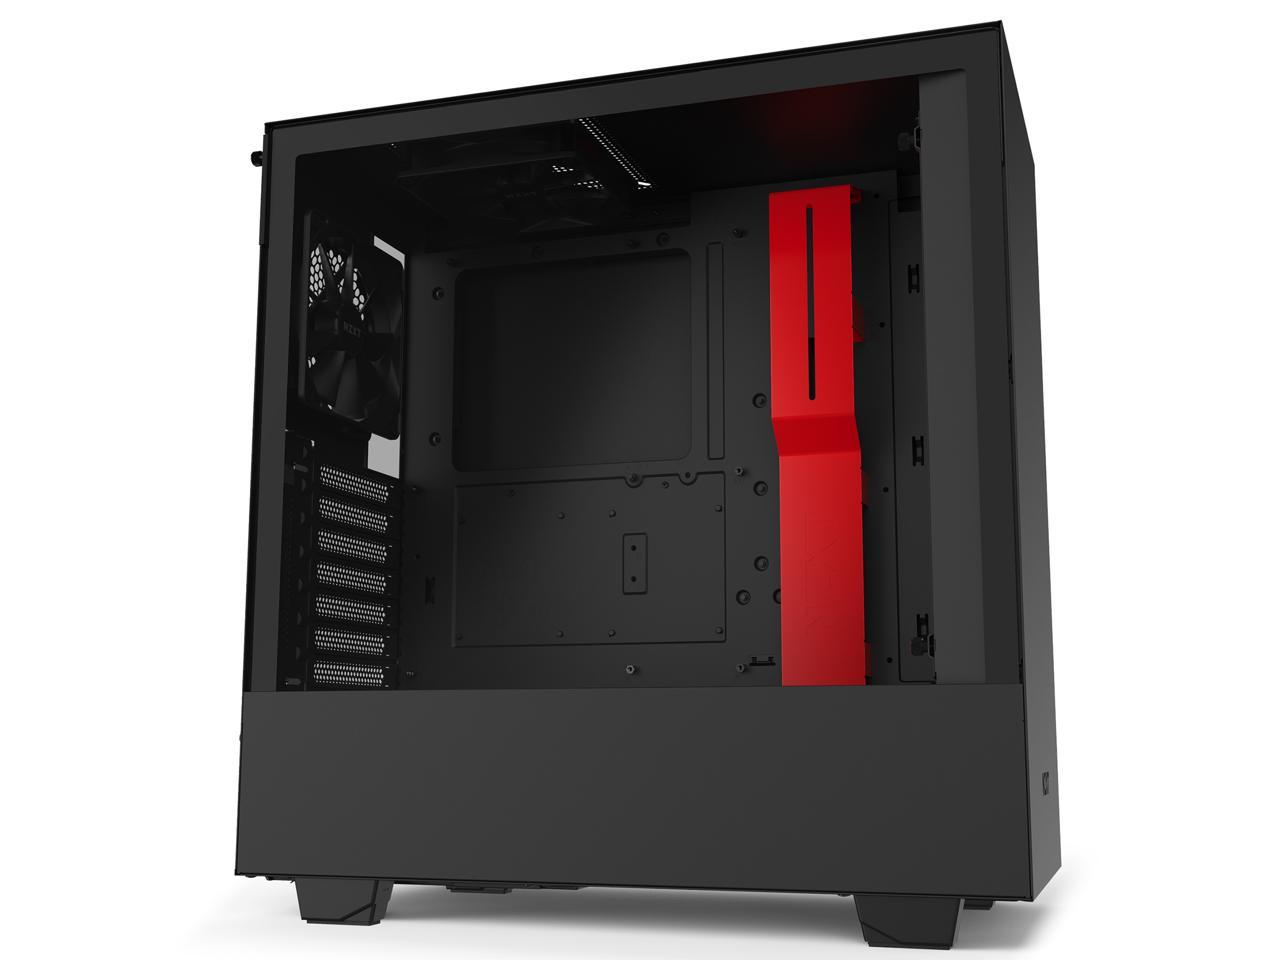 Tempered Glass Side Panel Water-Cooling Ready Compact ATX Mid-Tower PC Gaming Case NZXT H510 Cable Management System Front I/O USB Type-C Port White/Black Steel Construction 